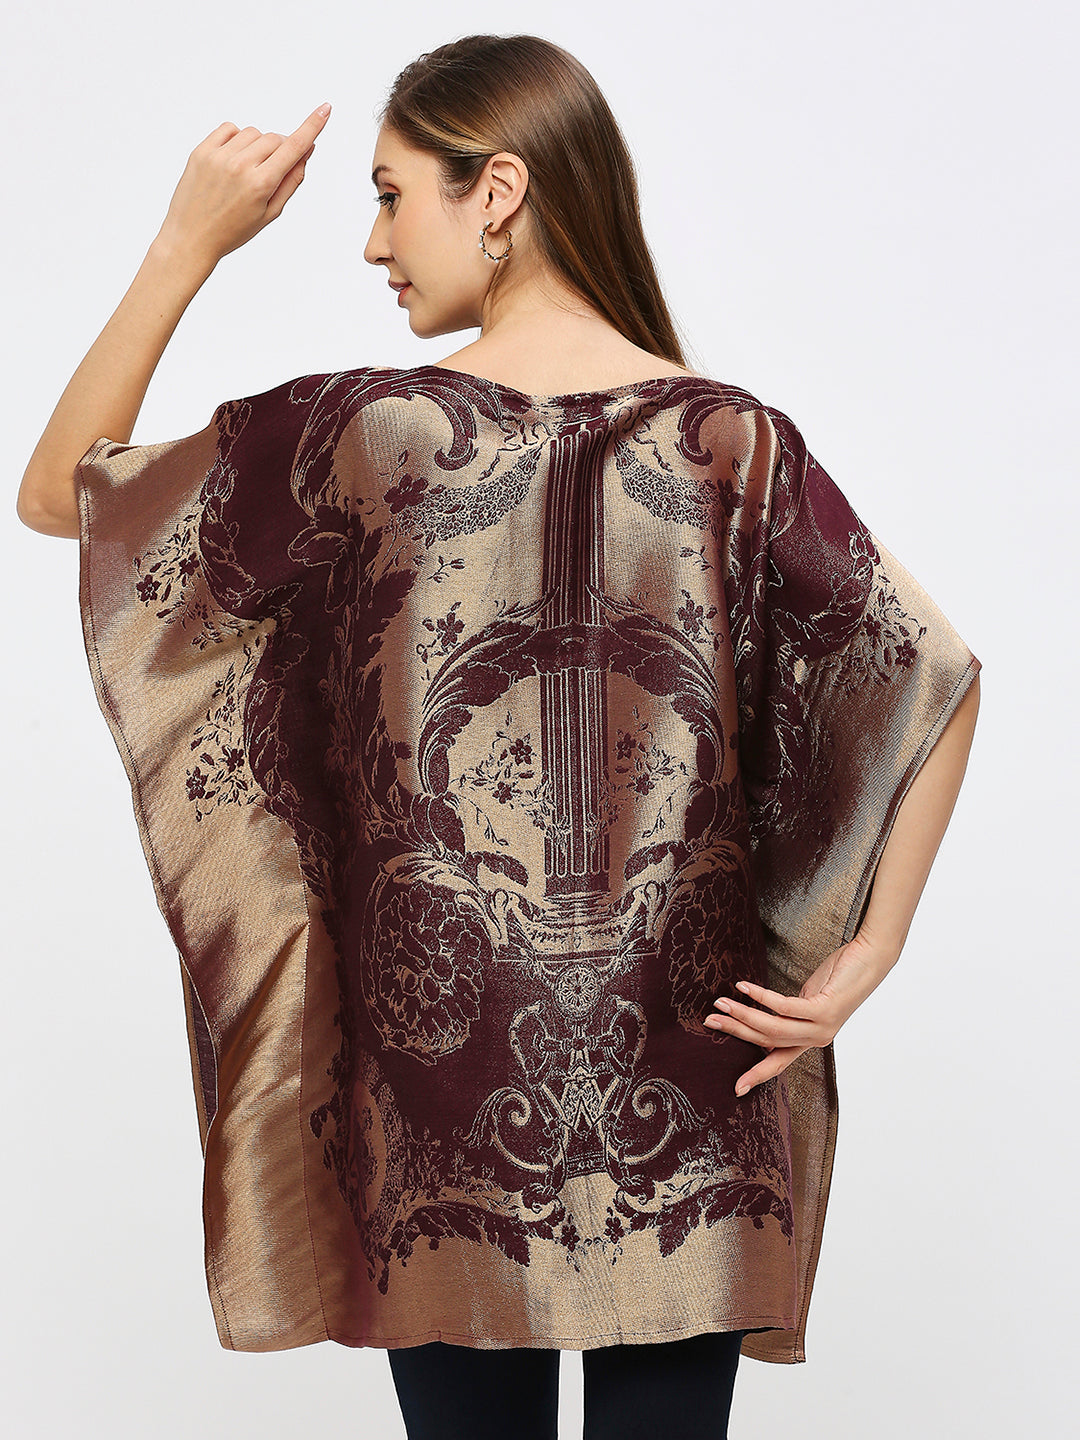 Brocade French Patterned Designed Wine Poncho